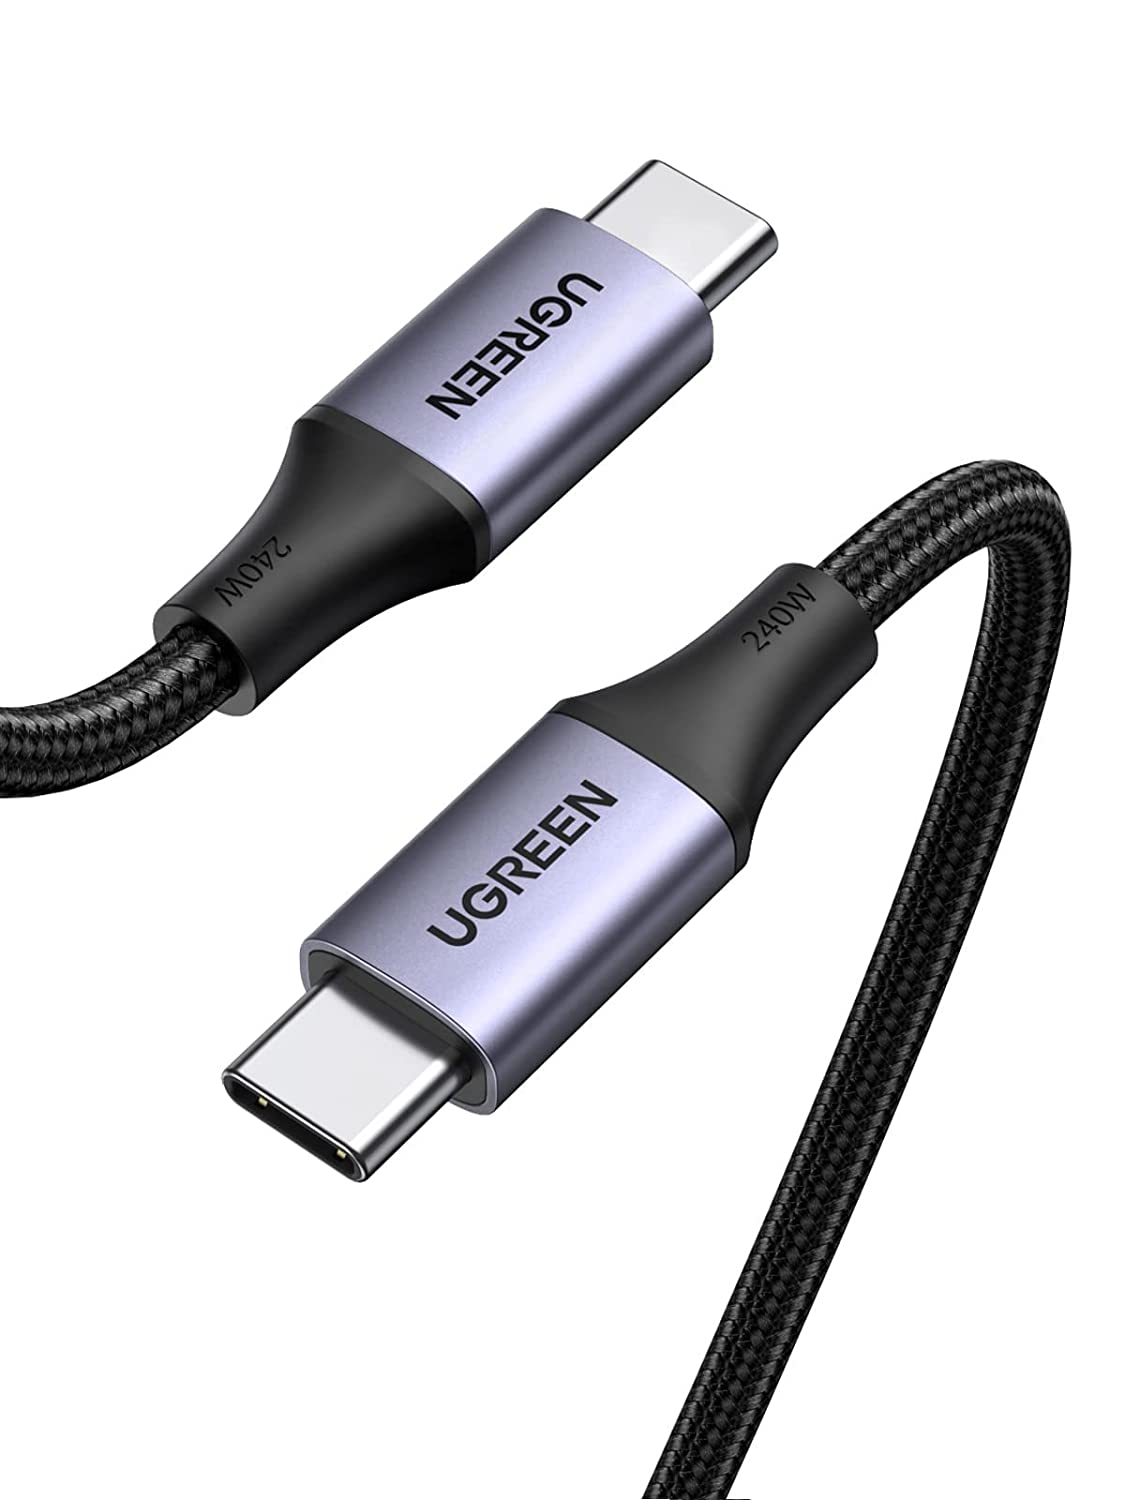 240W 6FT UGREEN USB C to USB C Fast Charging Cable $10.75, 40W Dual Port USB C Charger $14.40, 100W 2-Port USB C Charger $39.89 & More + Free Shipping w/ Prime or +$25 Orders